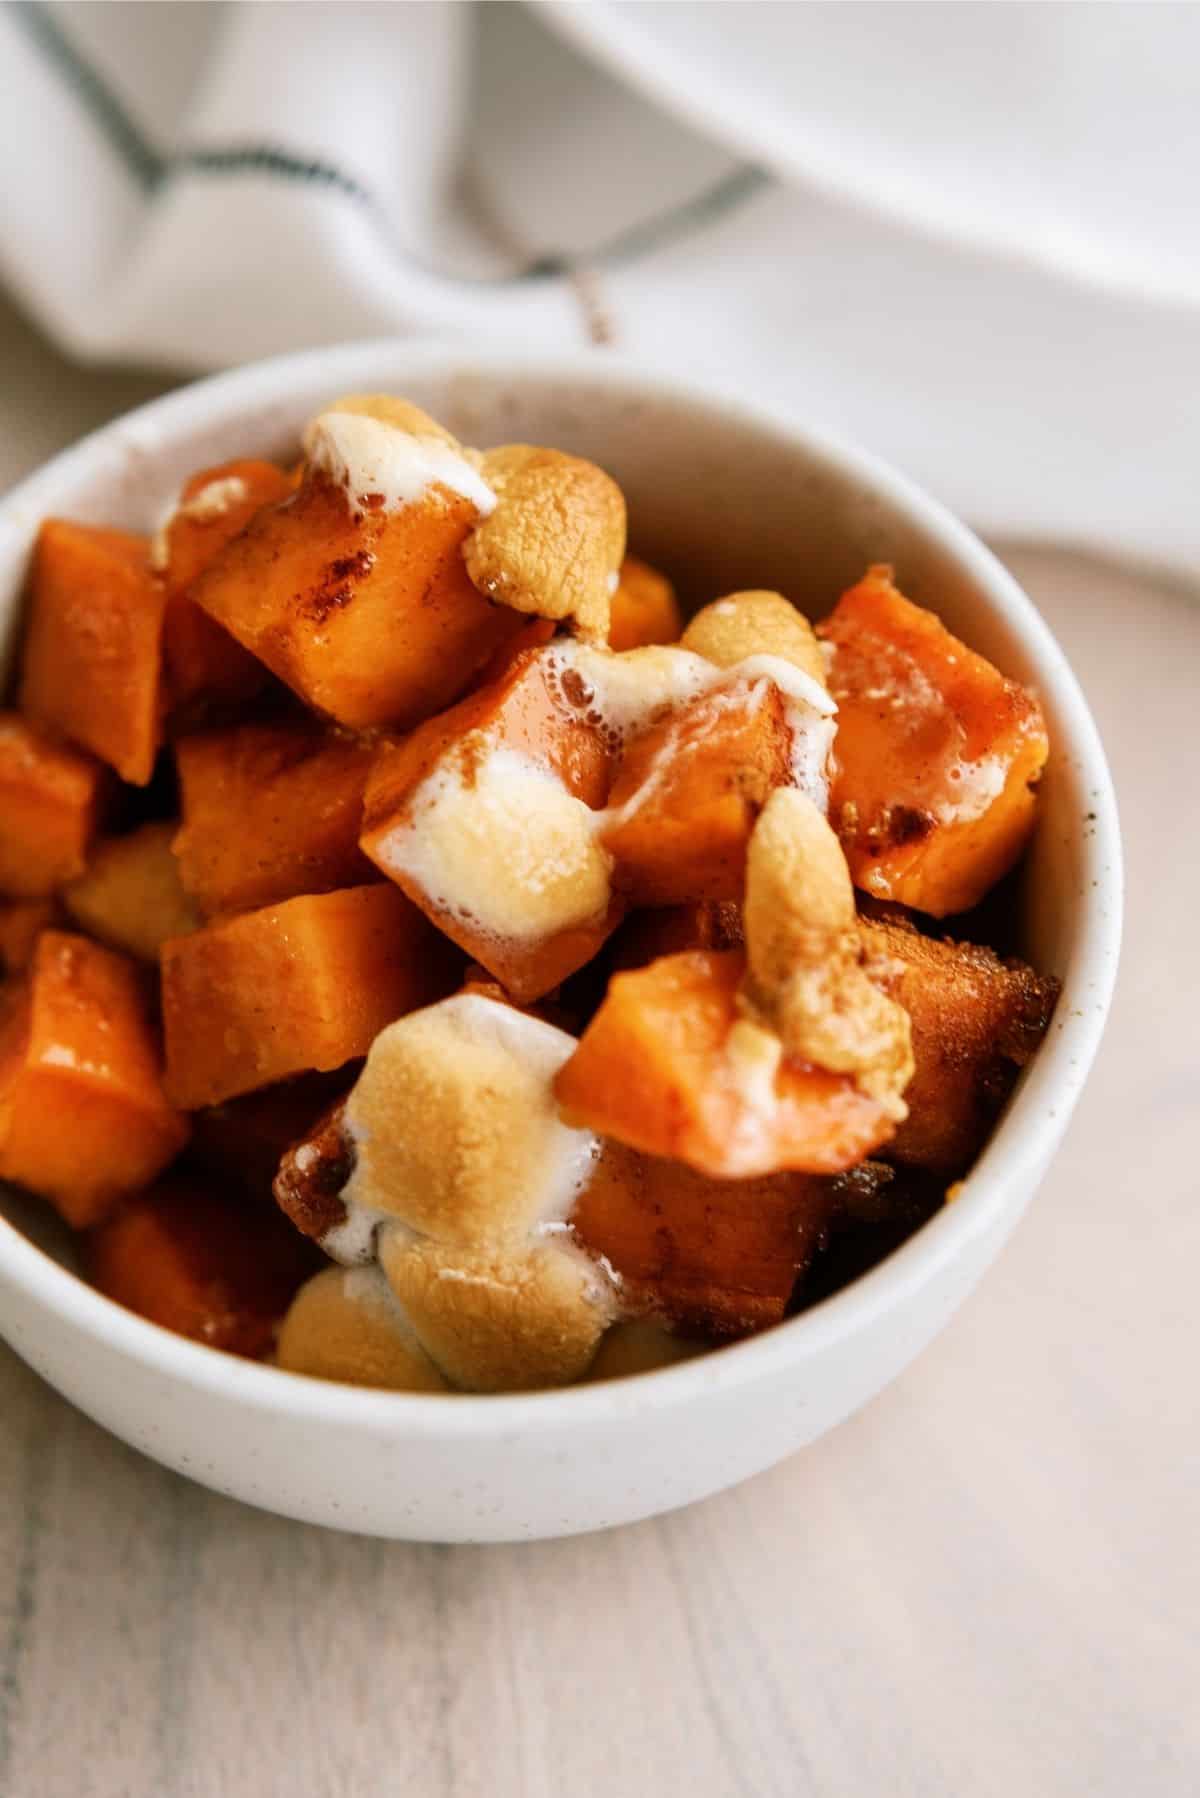 https://www.sixsistersstuff.com/wp-content/uploads/2020/11/Candied-Yams-without-Corn-Syrup.jpg